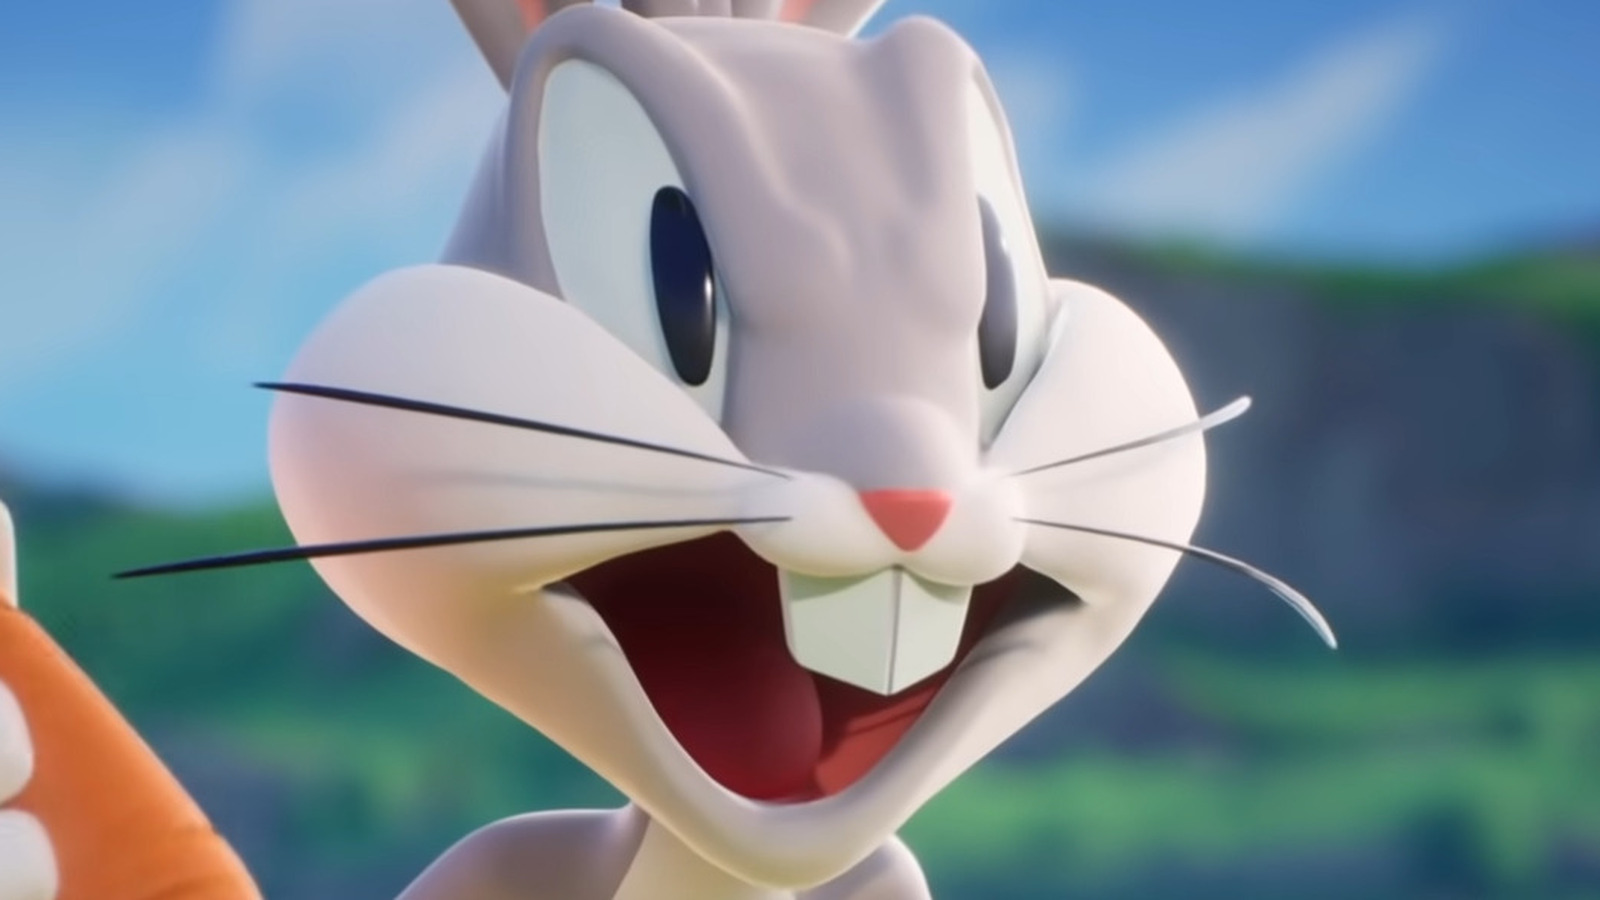 Why MultiVersus Fans Think This Infamous Looney Tunes Meme Is Being Added